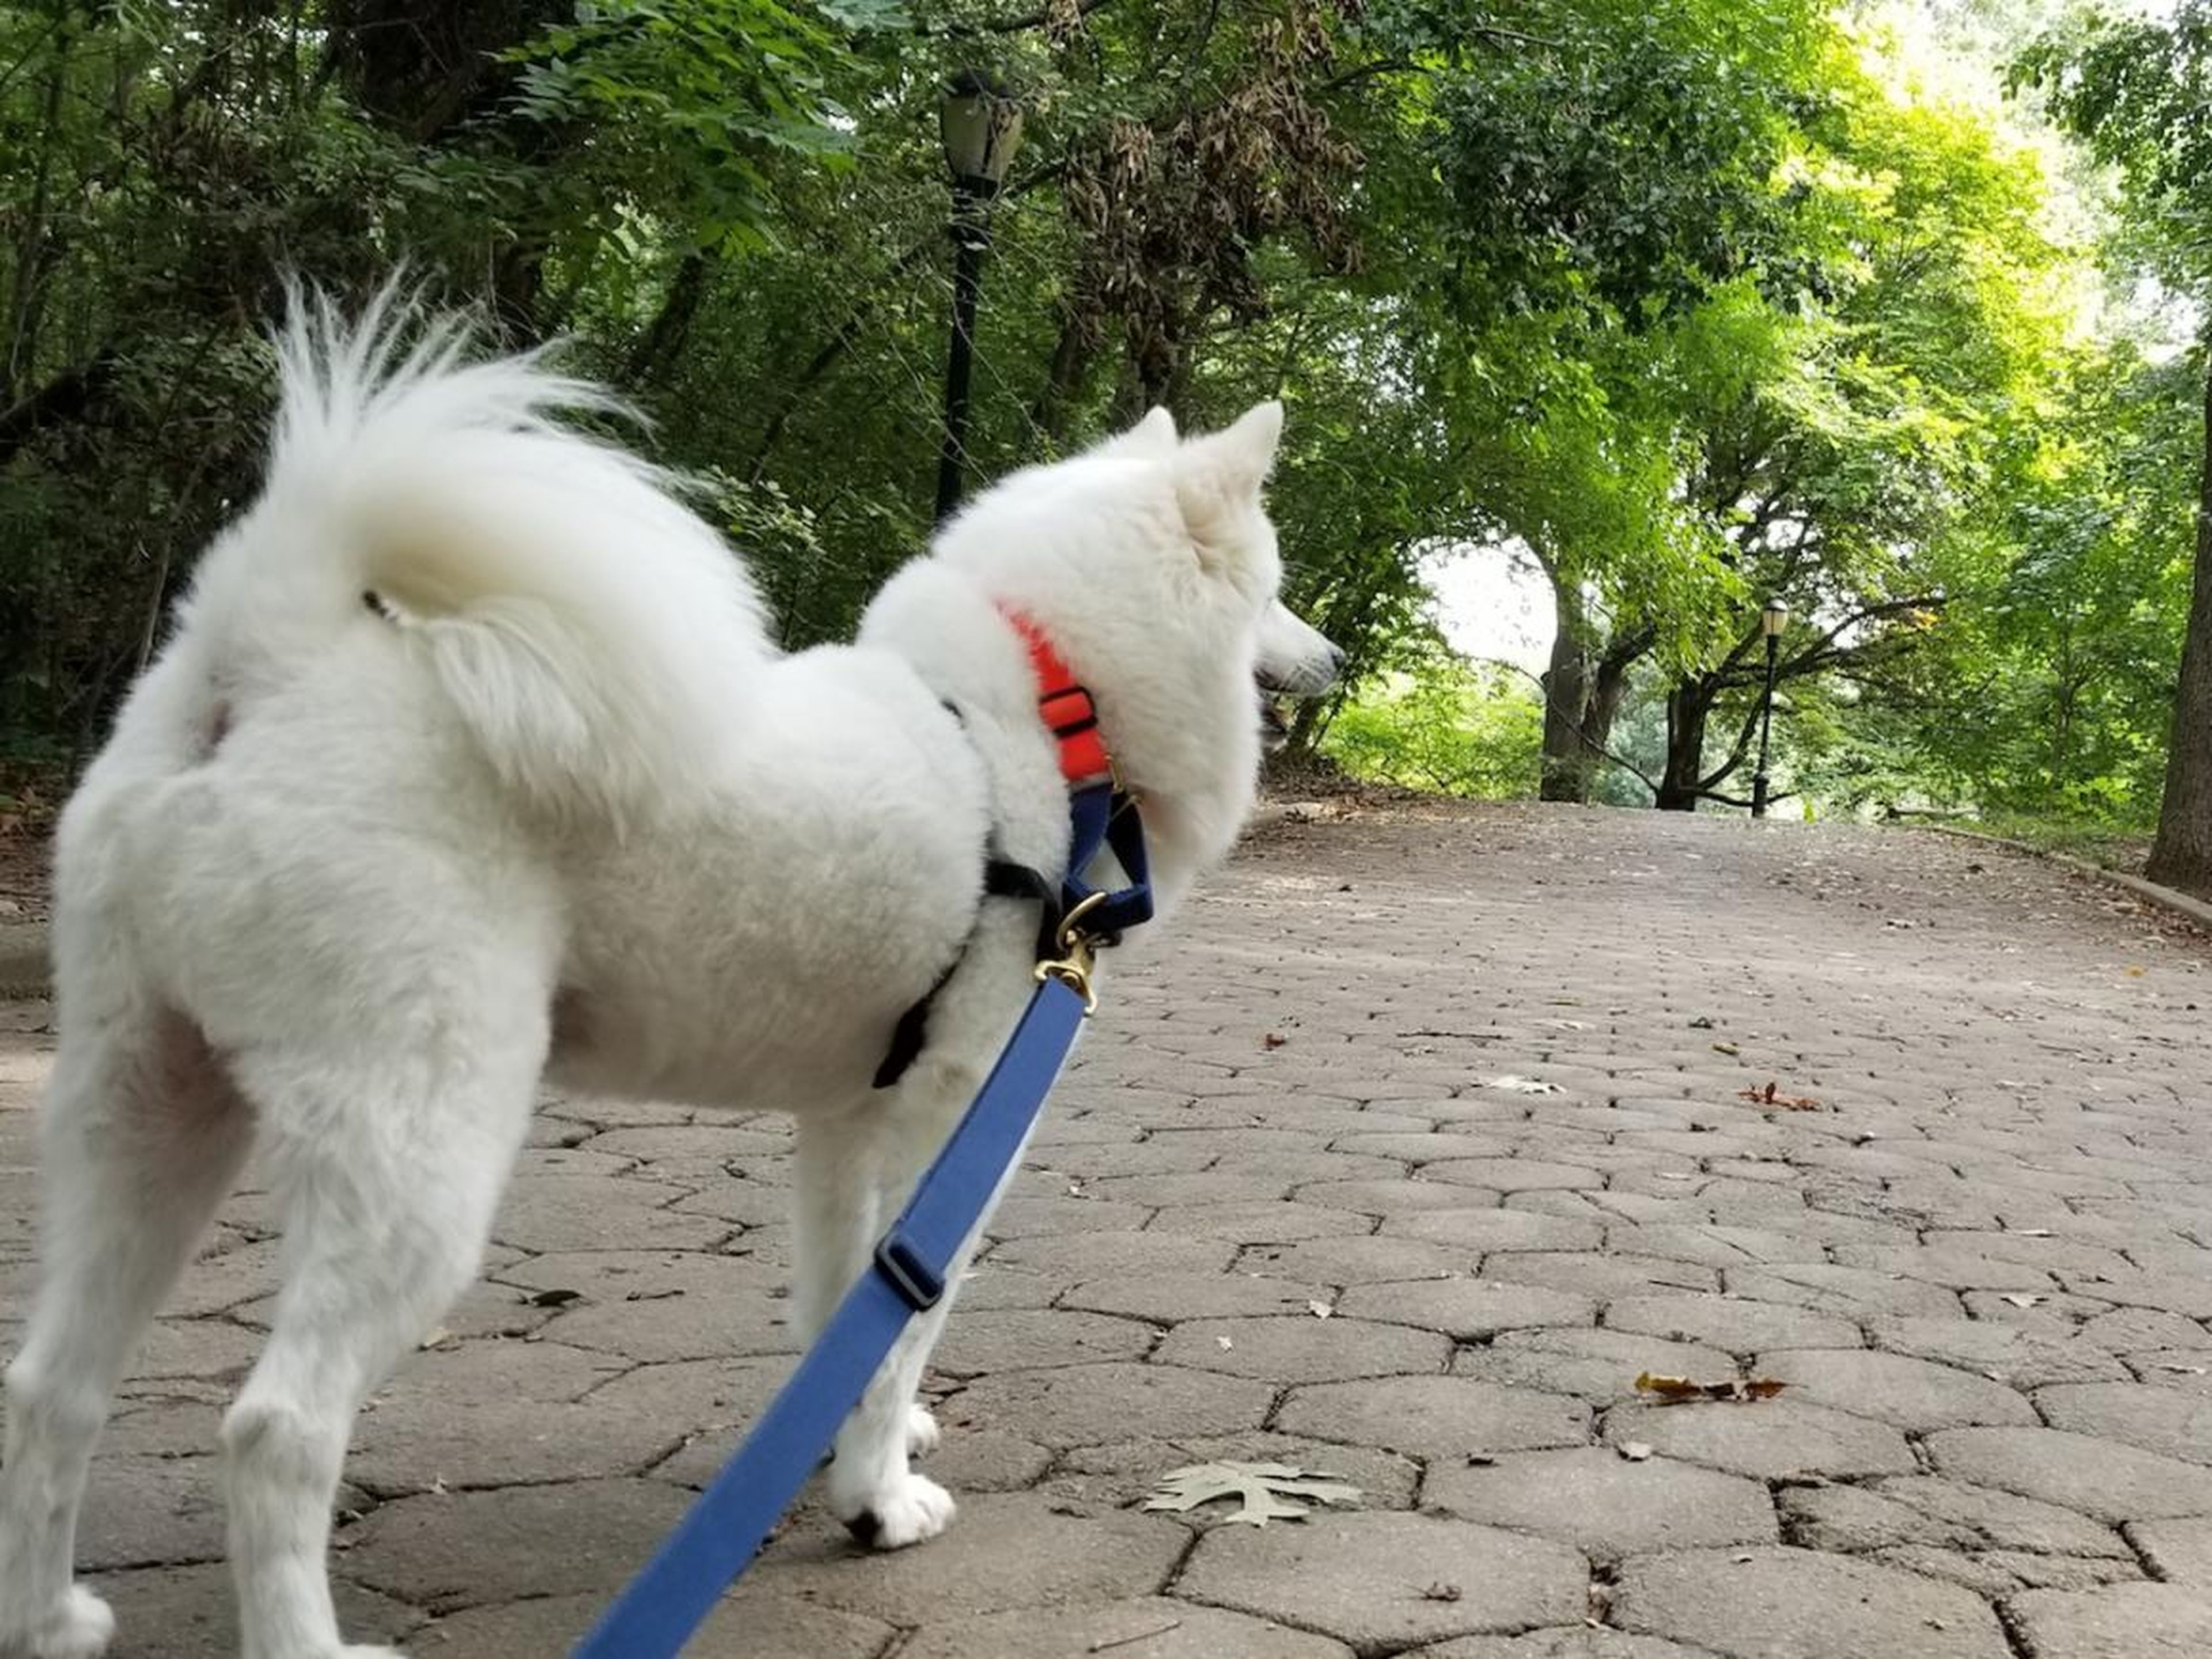 If he's waking up at home, Sabatier typically takes his 9-year-old Eskie, Walter, for a 45-minute walk through Brooklyn and its parks at 7:45 a.m.